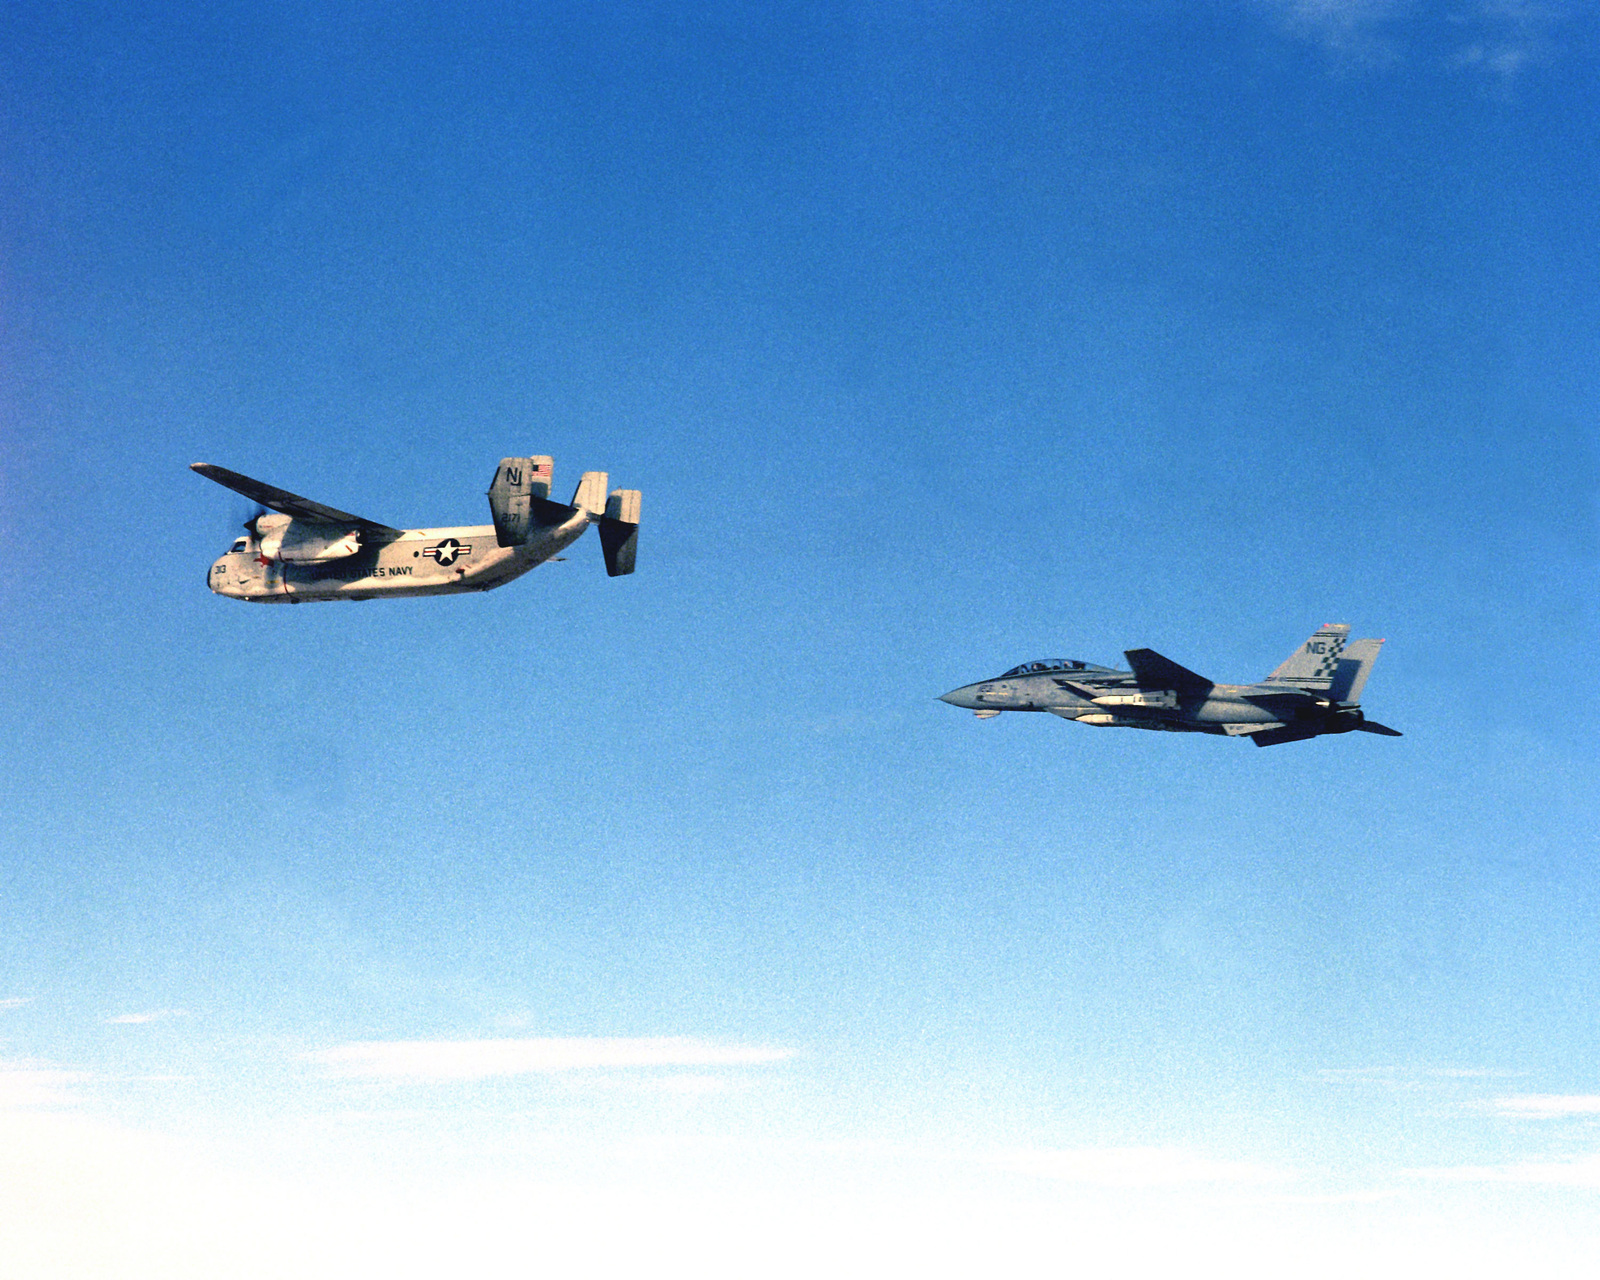 A Fighter Squadron 211 Vf 211 F 14a Tomcat Aircraft Flies Behind A Carrier Airborne Early